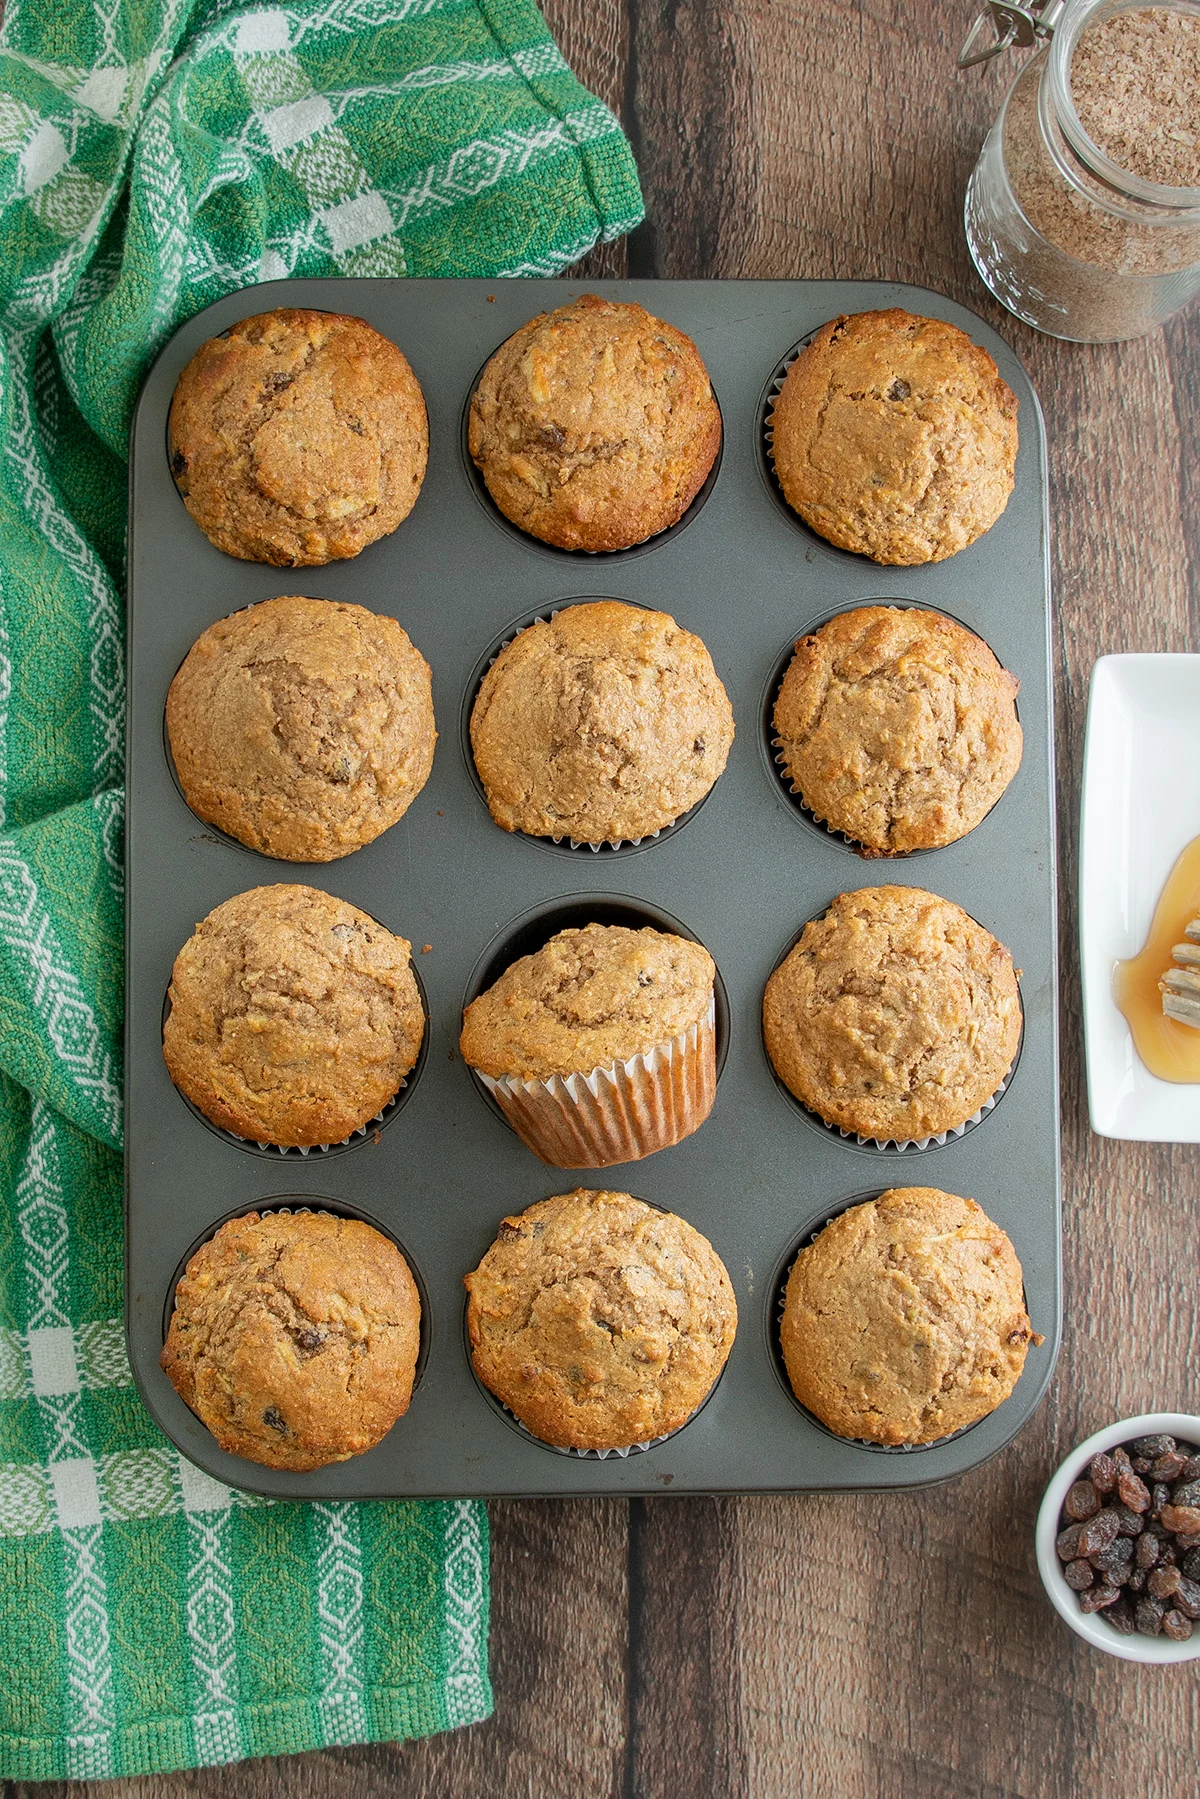 Low Calorie Maple Oat Bran Muffins with Currants